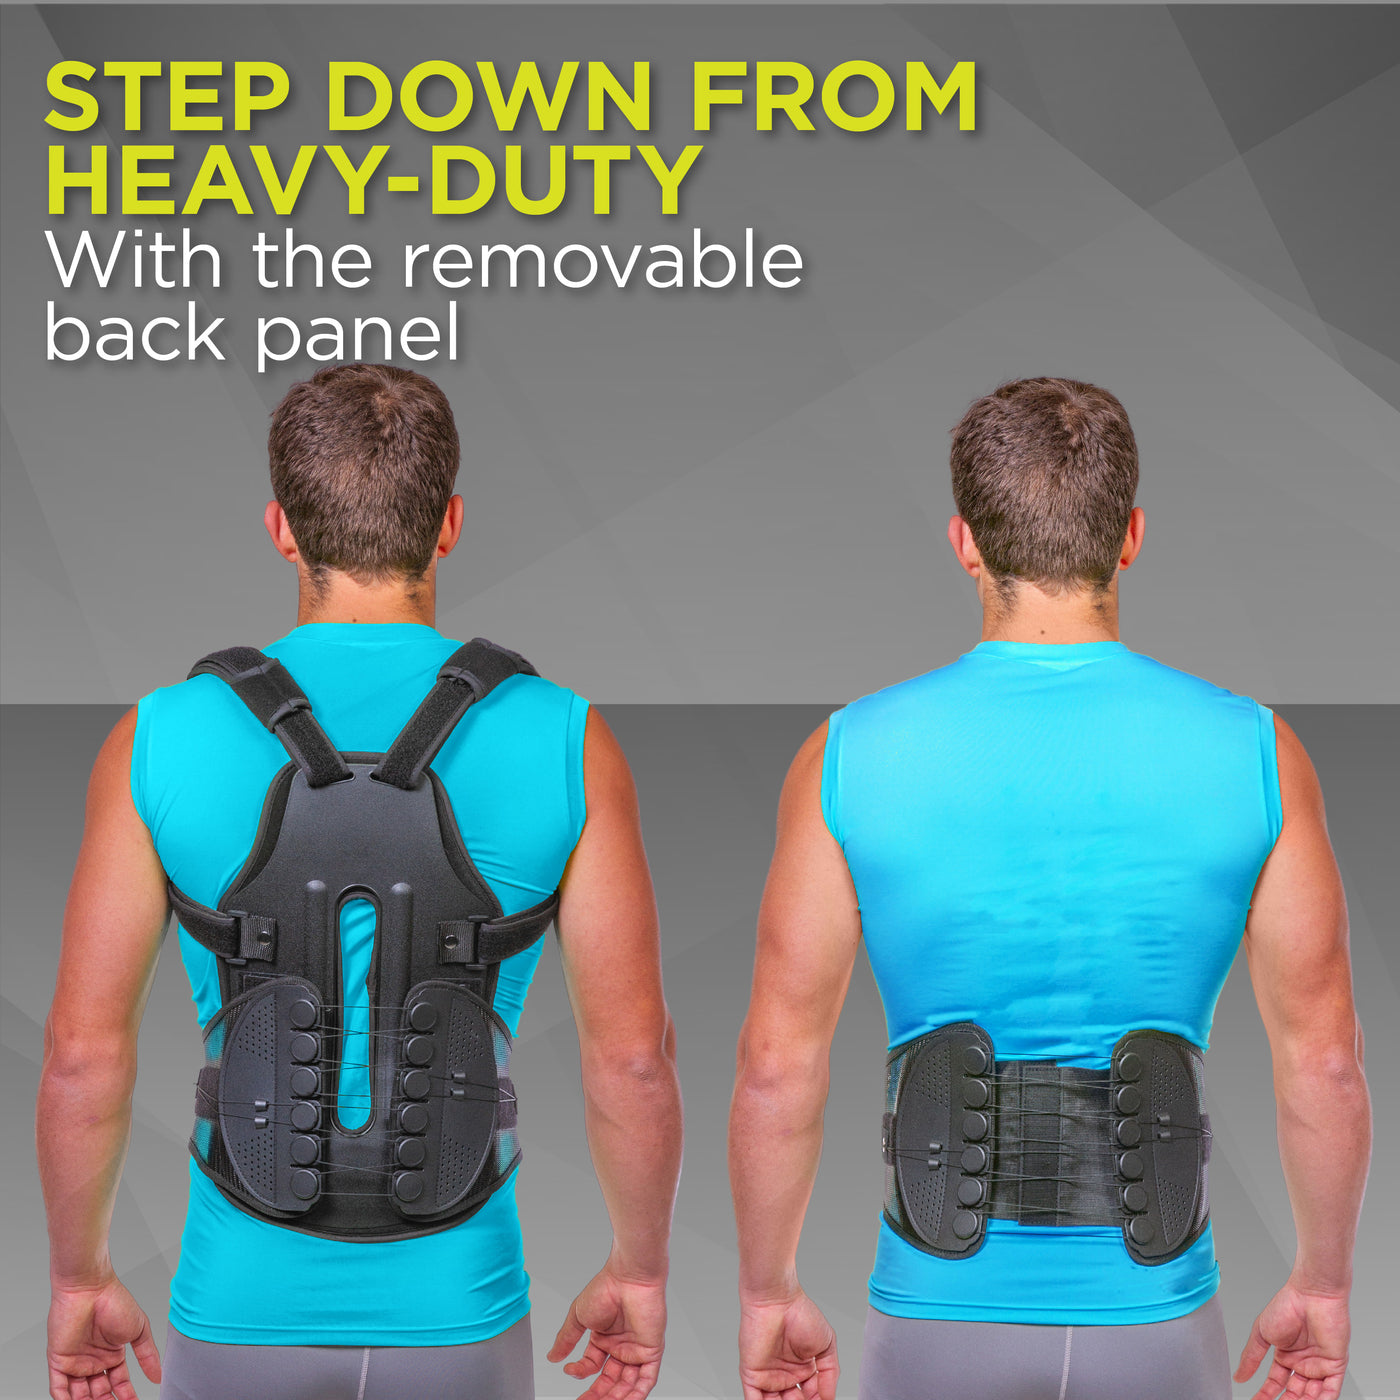 our rigid back support covers the entire thoracic spine region and is easy to put on with the quick-attach buckles